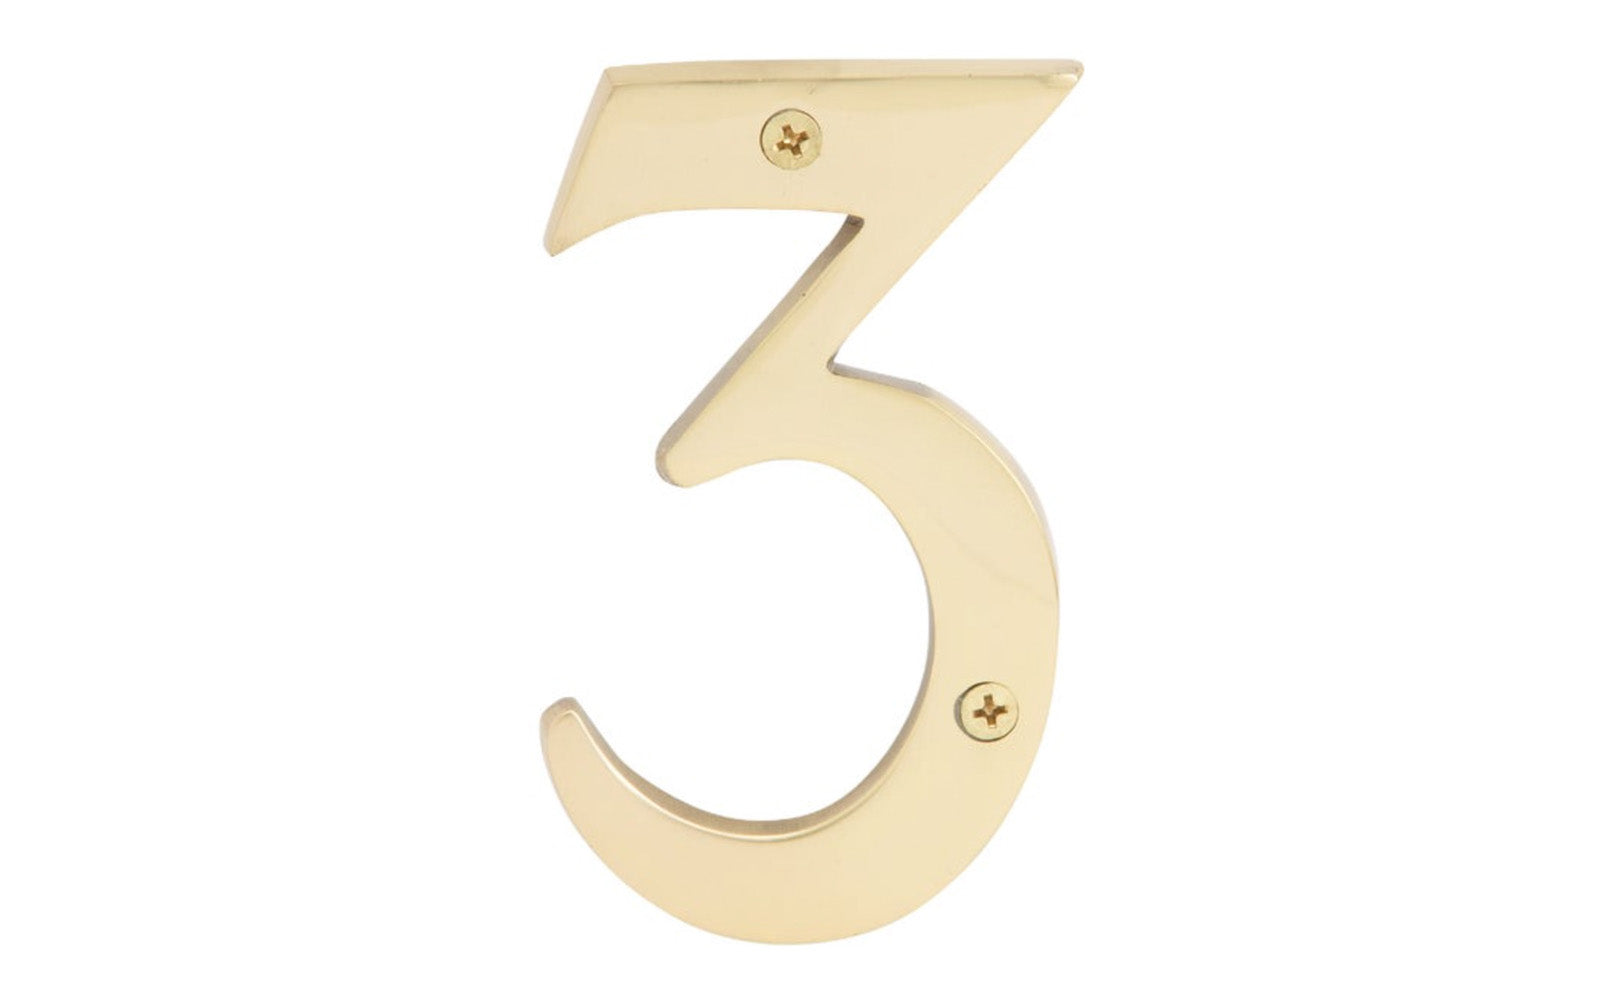 Number Three Solid Brass House Number in a 4" Size. Made of solid brass material - 1/4" thickness. Lacquered brass finish. Includes two flat head phillips screws. #3 House Number. Hy-Ko Model No. BR-90/3. 029069104931